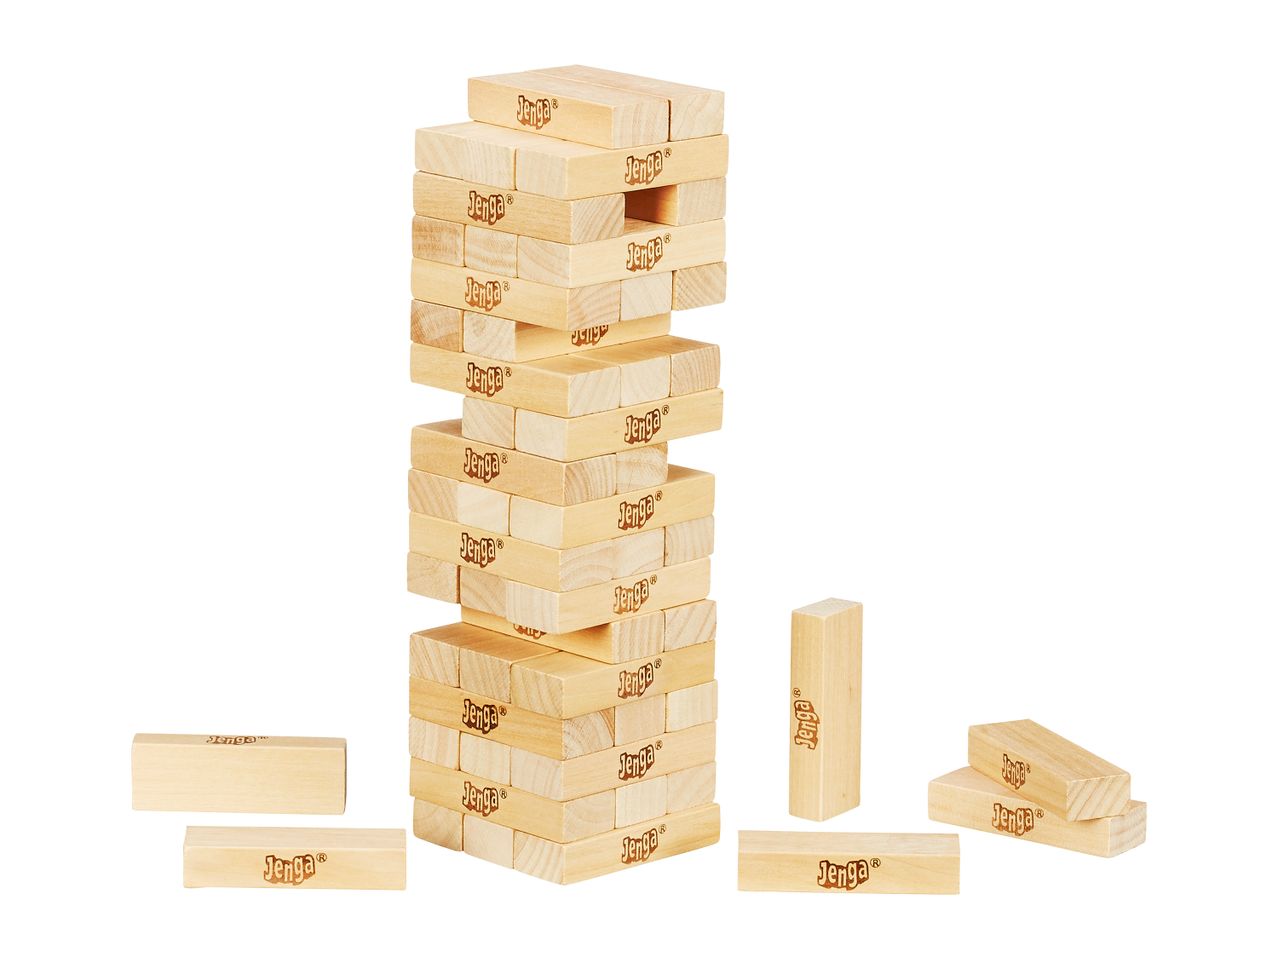 Go to full screen view: Hasbro Classic Jenga / Monopoly Junior / Guess Who? - Image 9